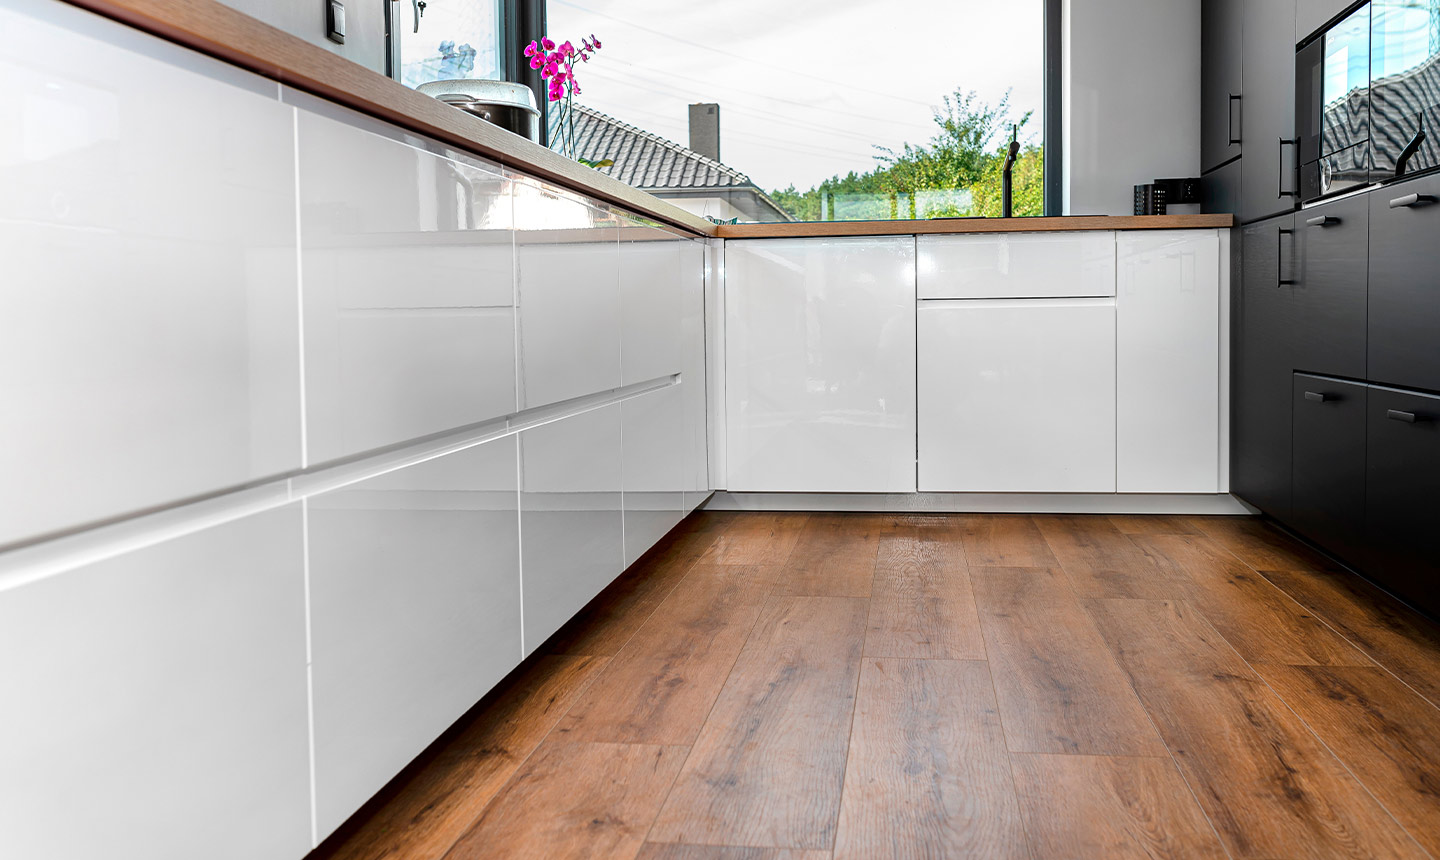 How to make your wooden floors shine?